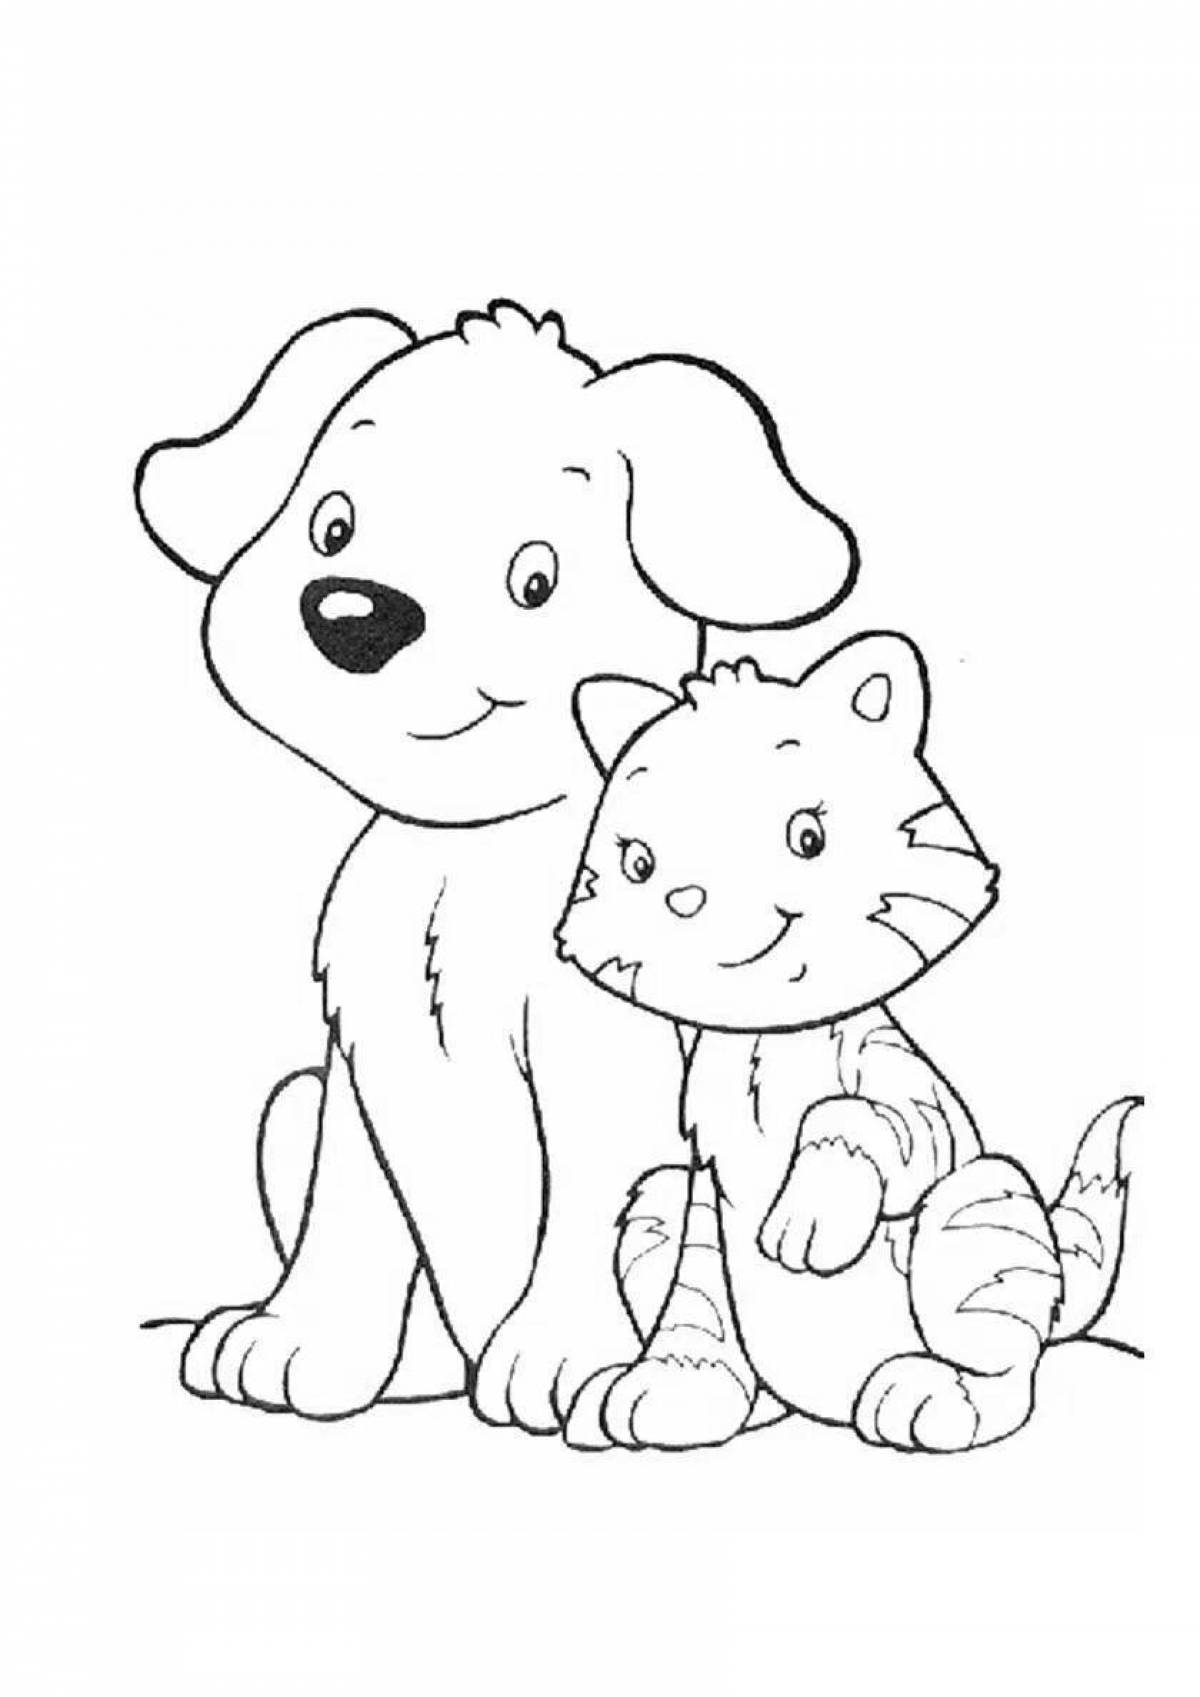 Adorable cat and dog coloring book